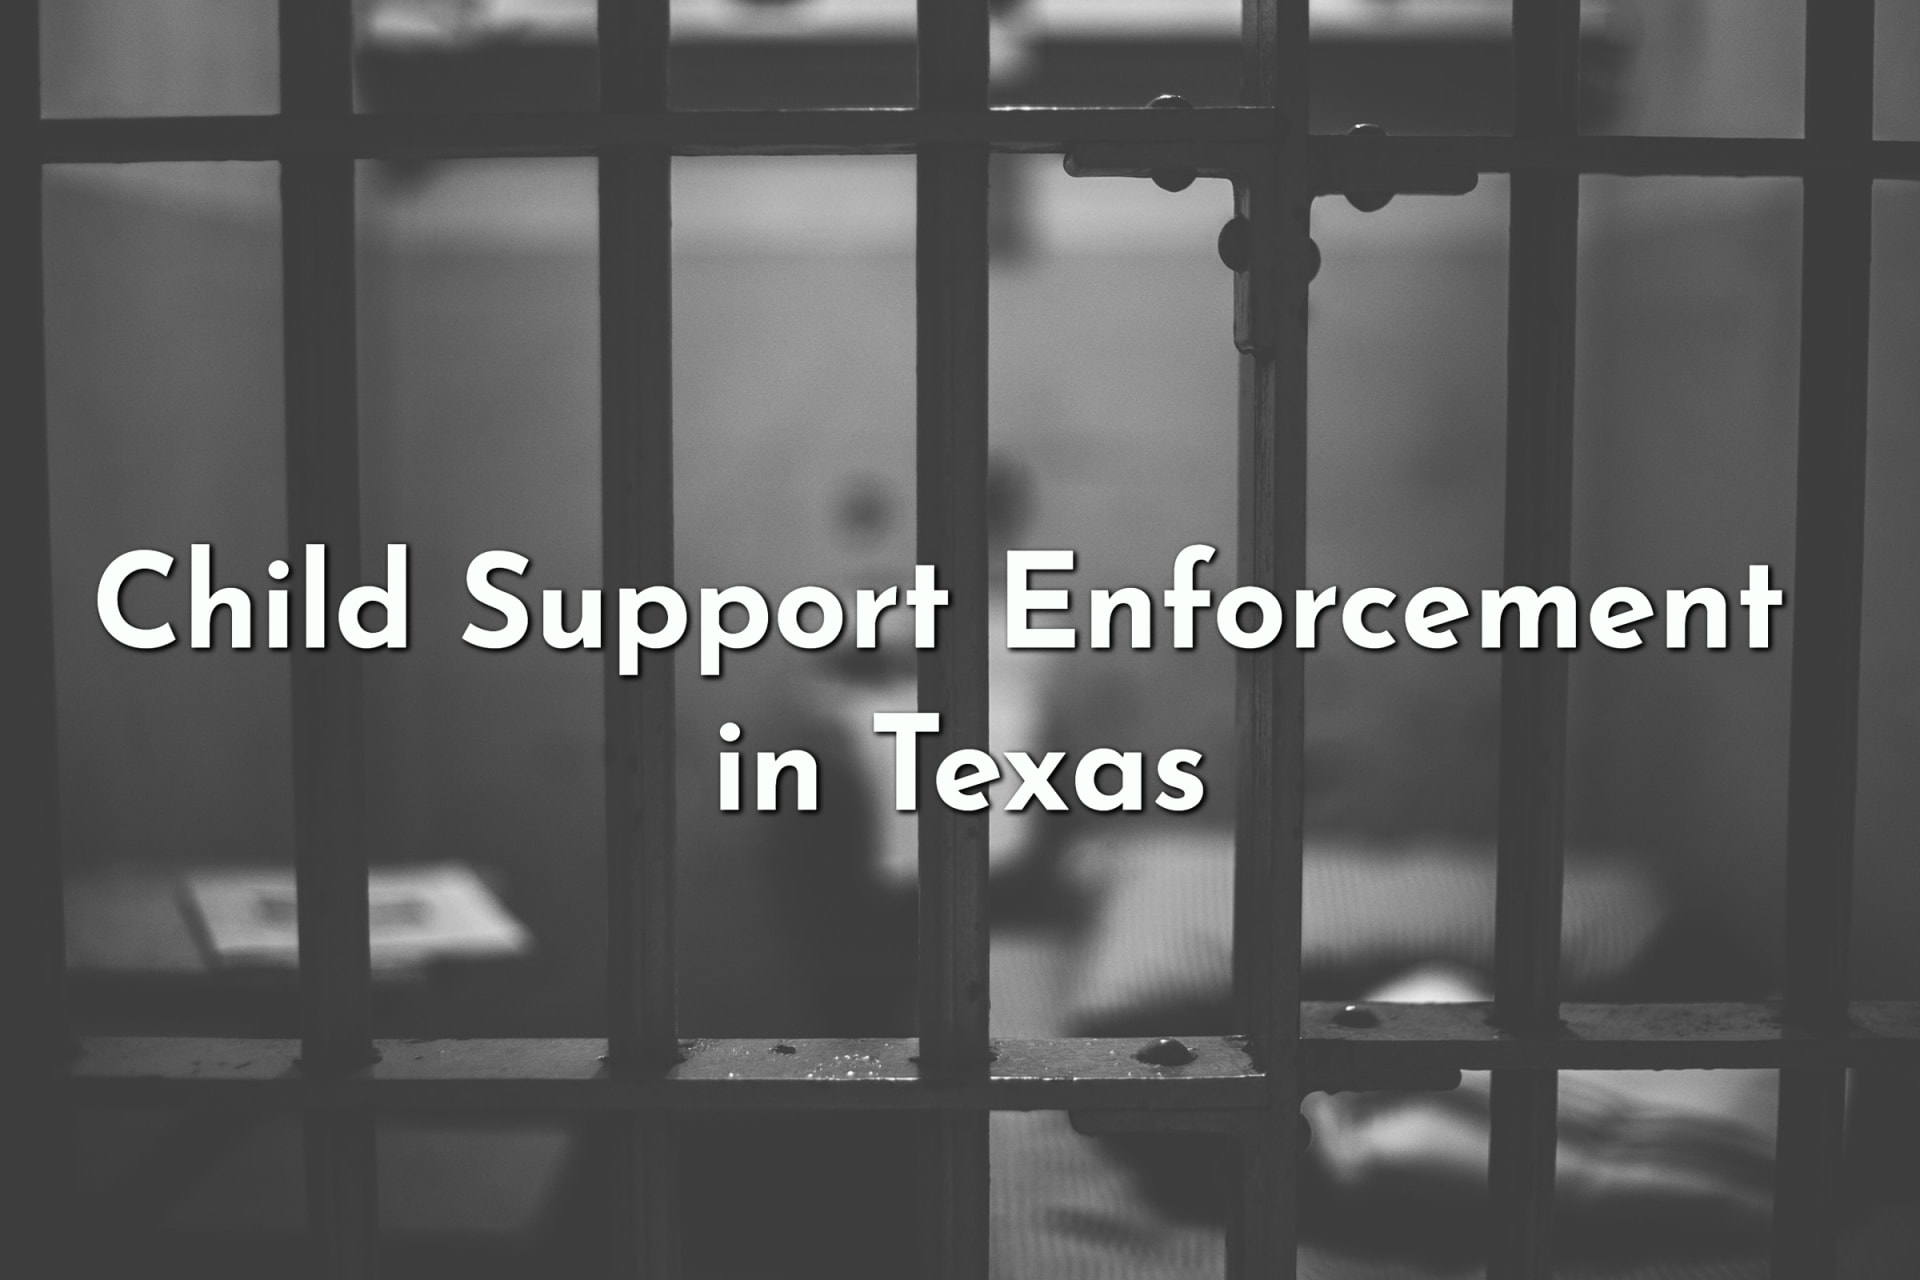 A jail cell showing the severity of child support enforcement in Texas